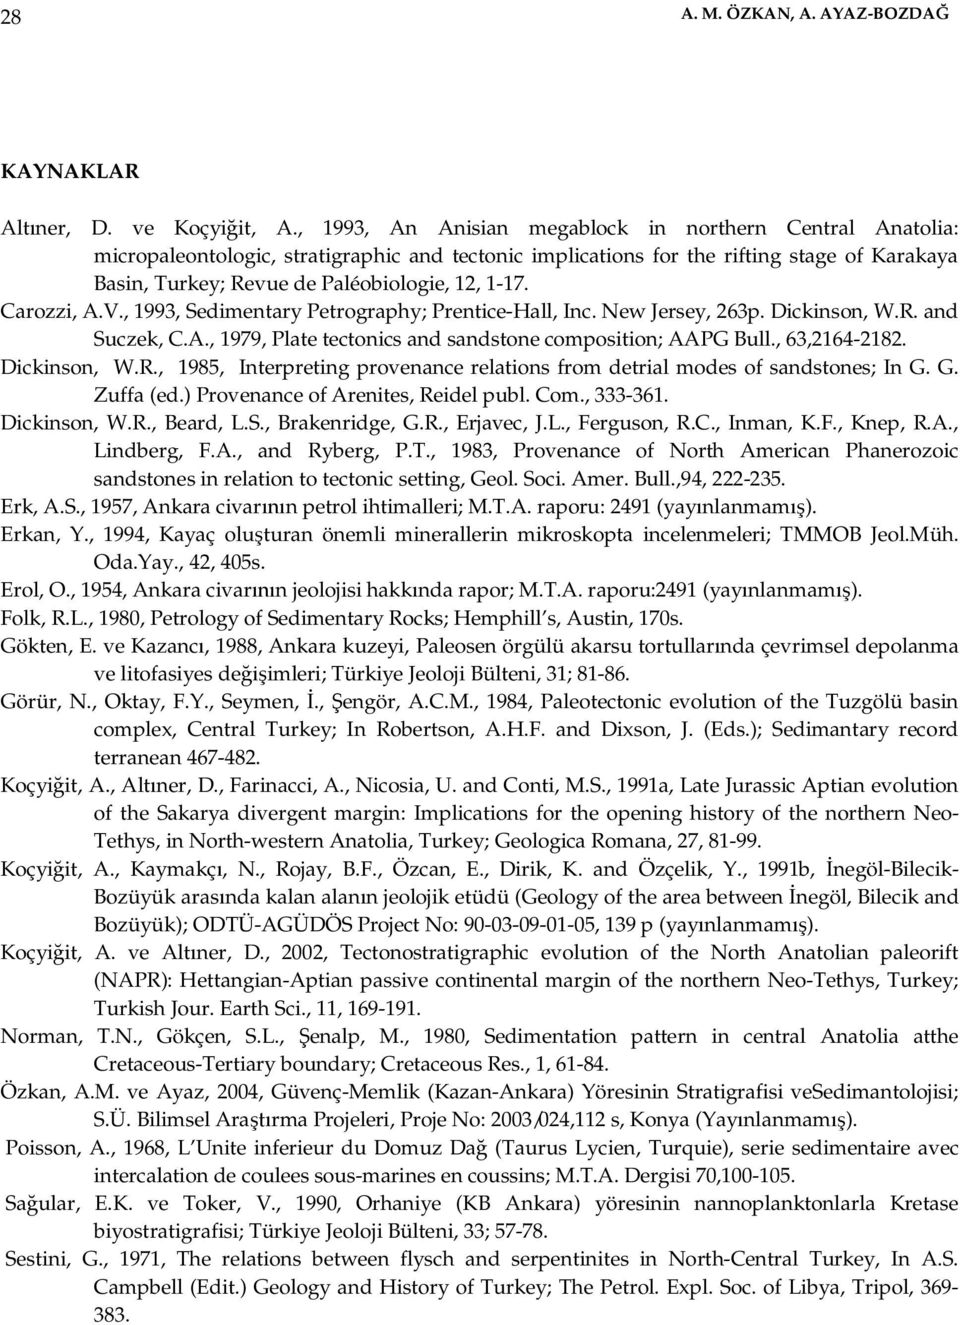 1-17. Carozzi, A.V., 1993, Sedimentary Petrography; Prentice-Hall, Inc. New Jersey, 263p. Dickinson, W.R. and Suczek, C.A., 1979, Plate tectonics and sandstone composition; AAPG Bull., 63,2164-2182.